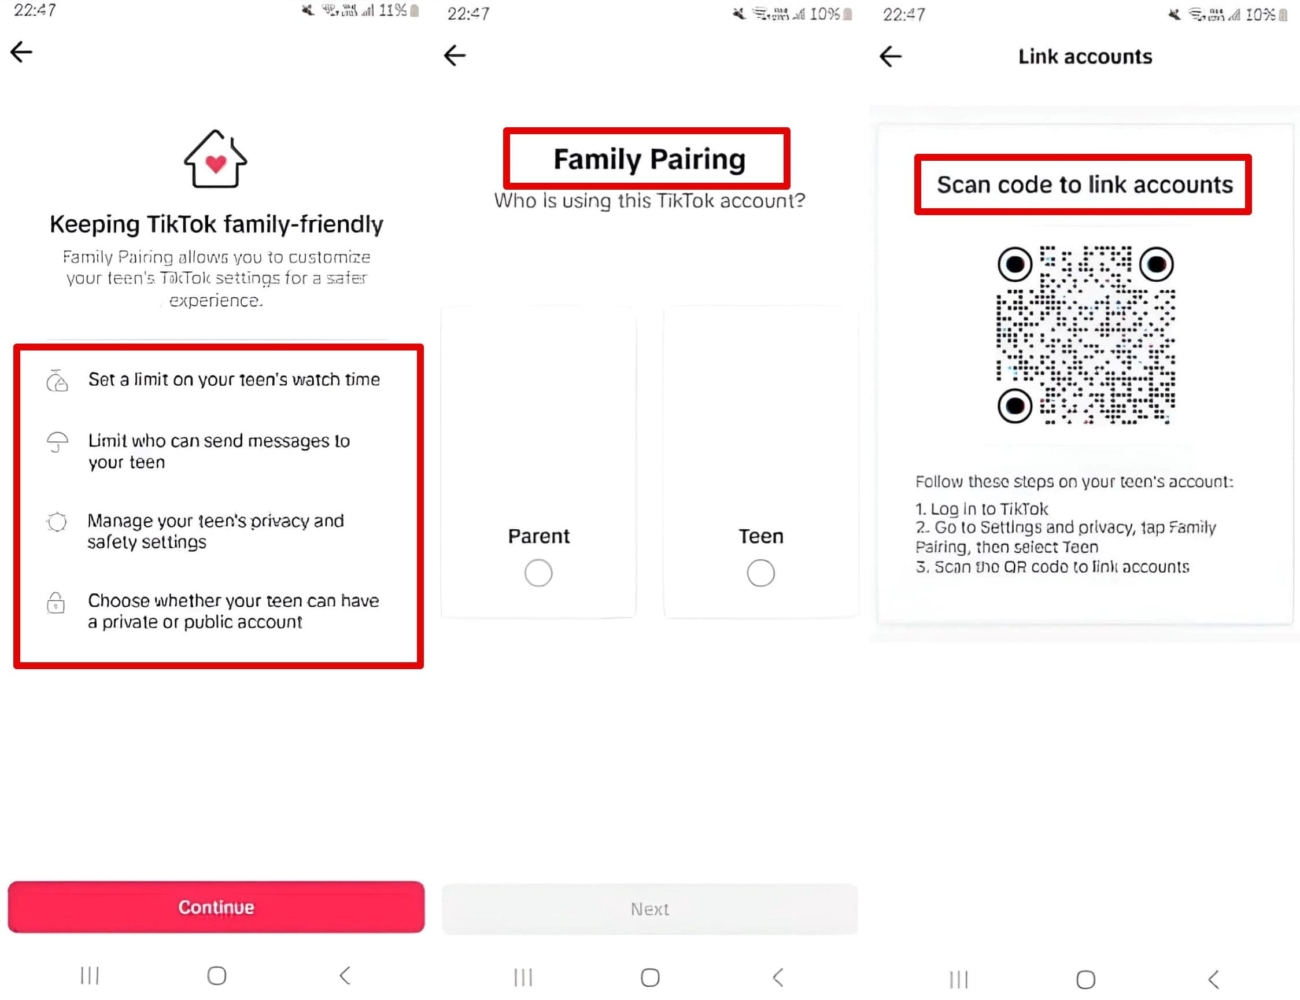 An image of how to set up Family Pairing on TikTok